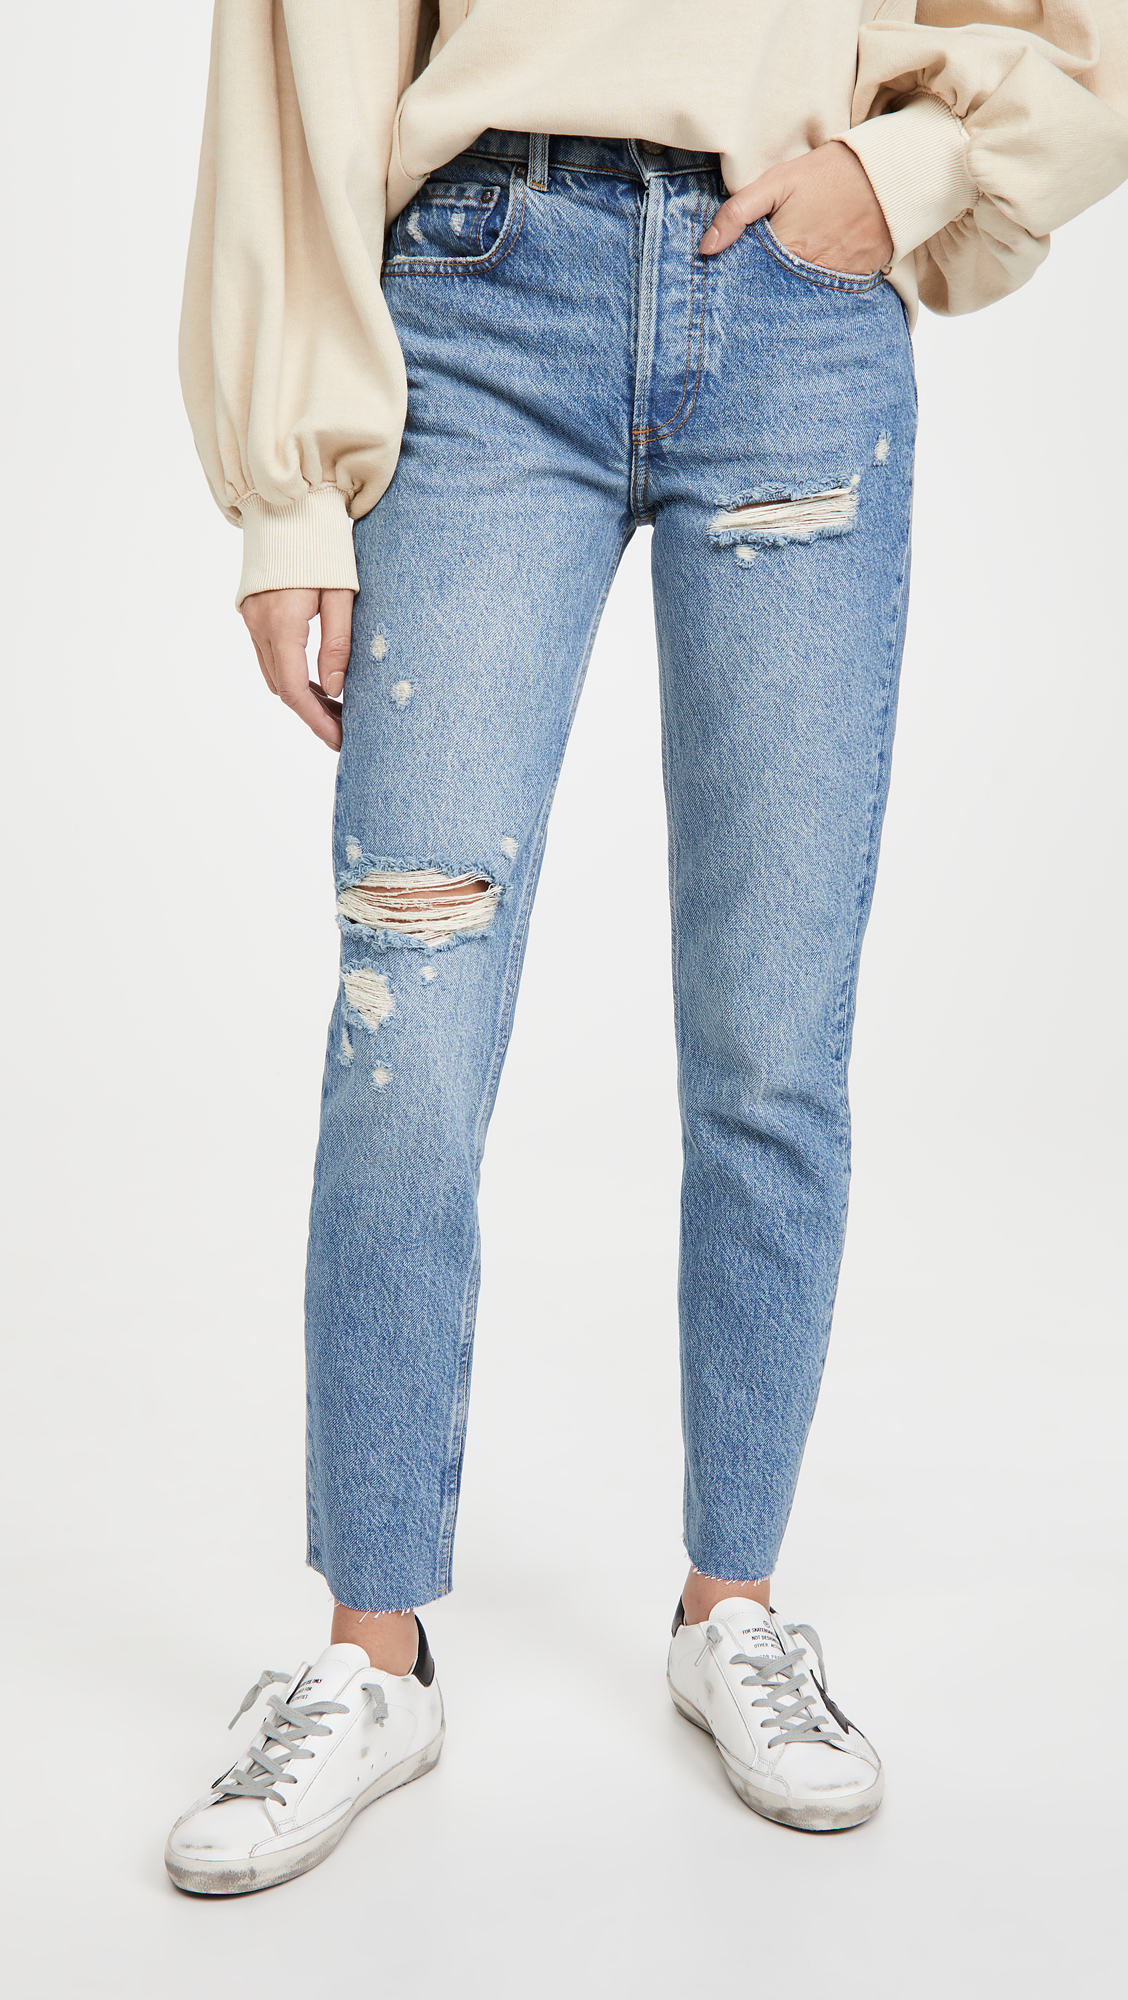 Buy > fall jeans 2021 > in stock